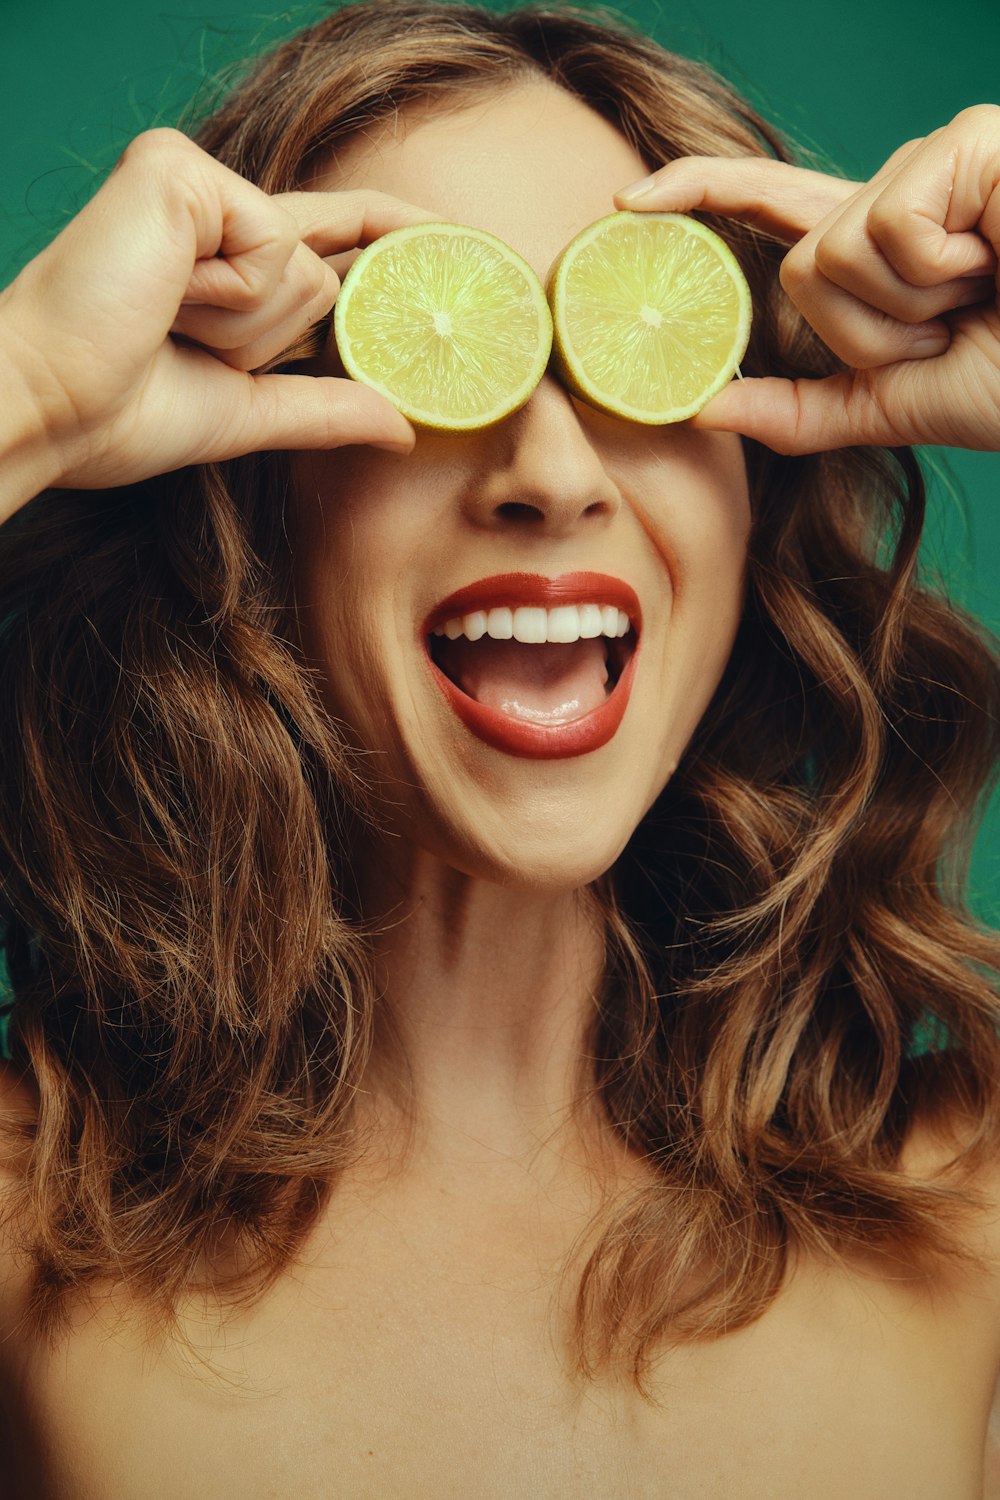 a woman holding two slices of limes over her eyes